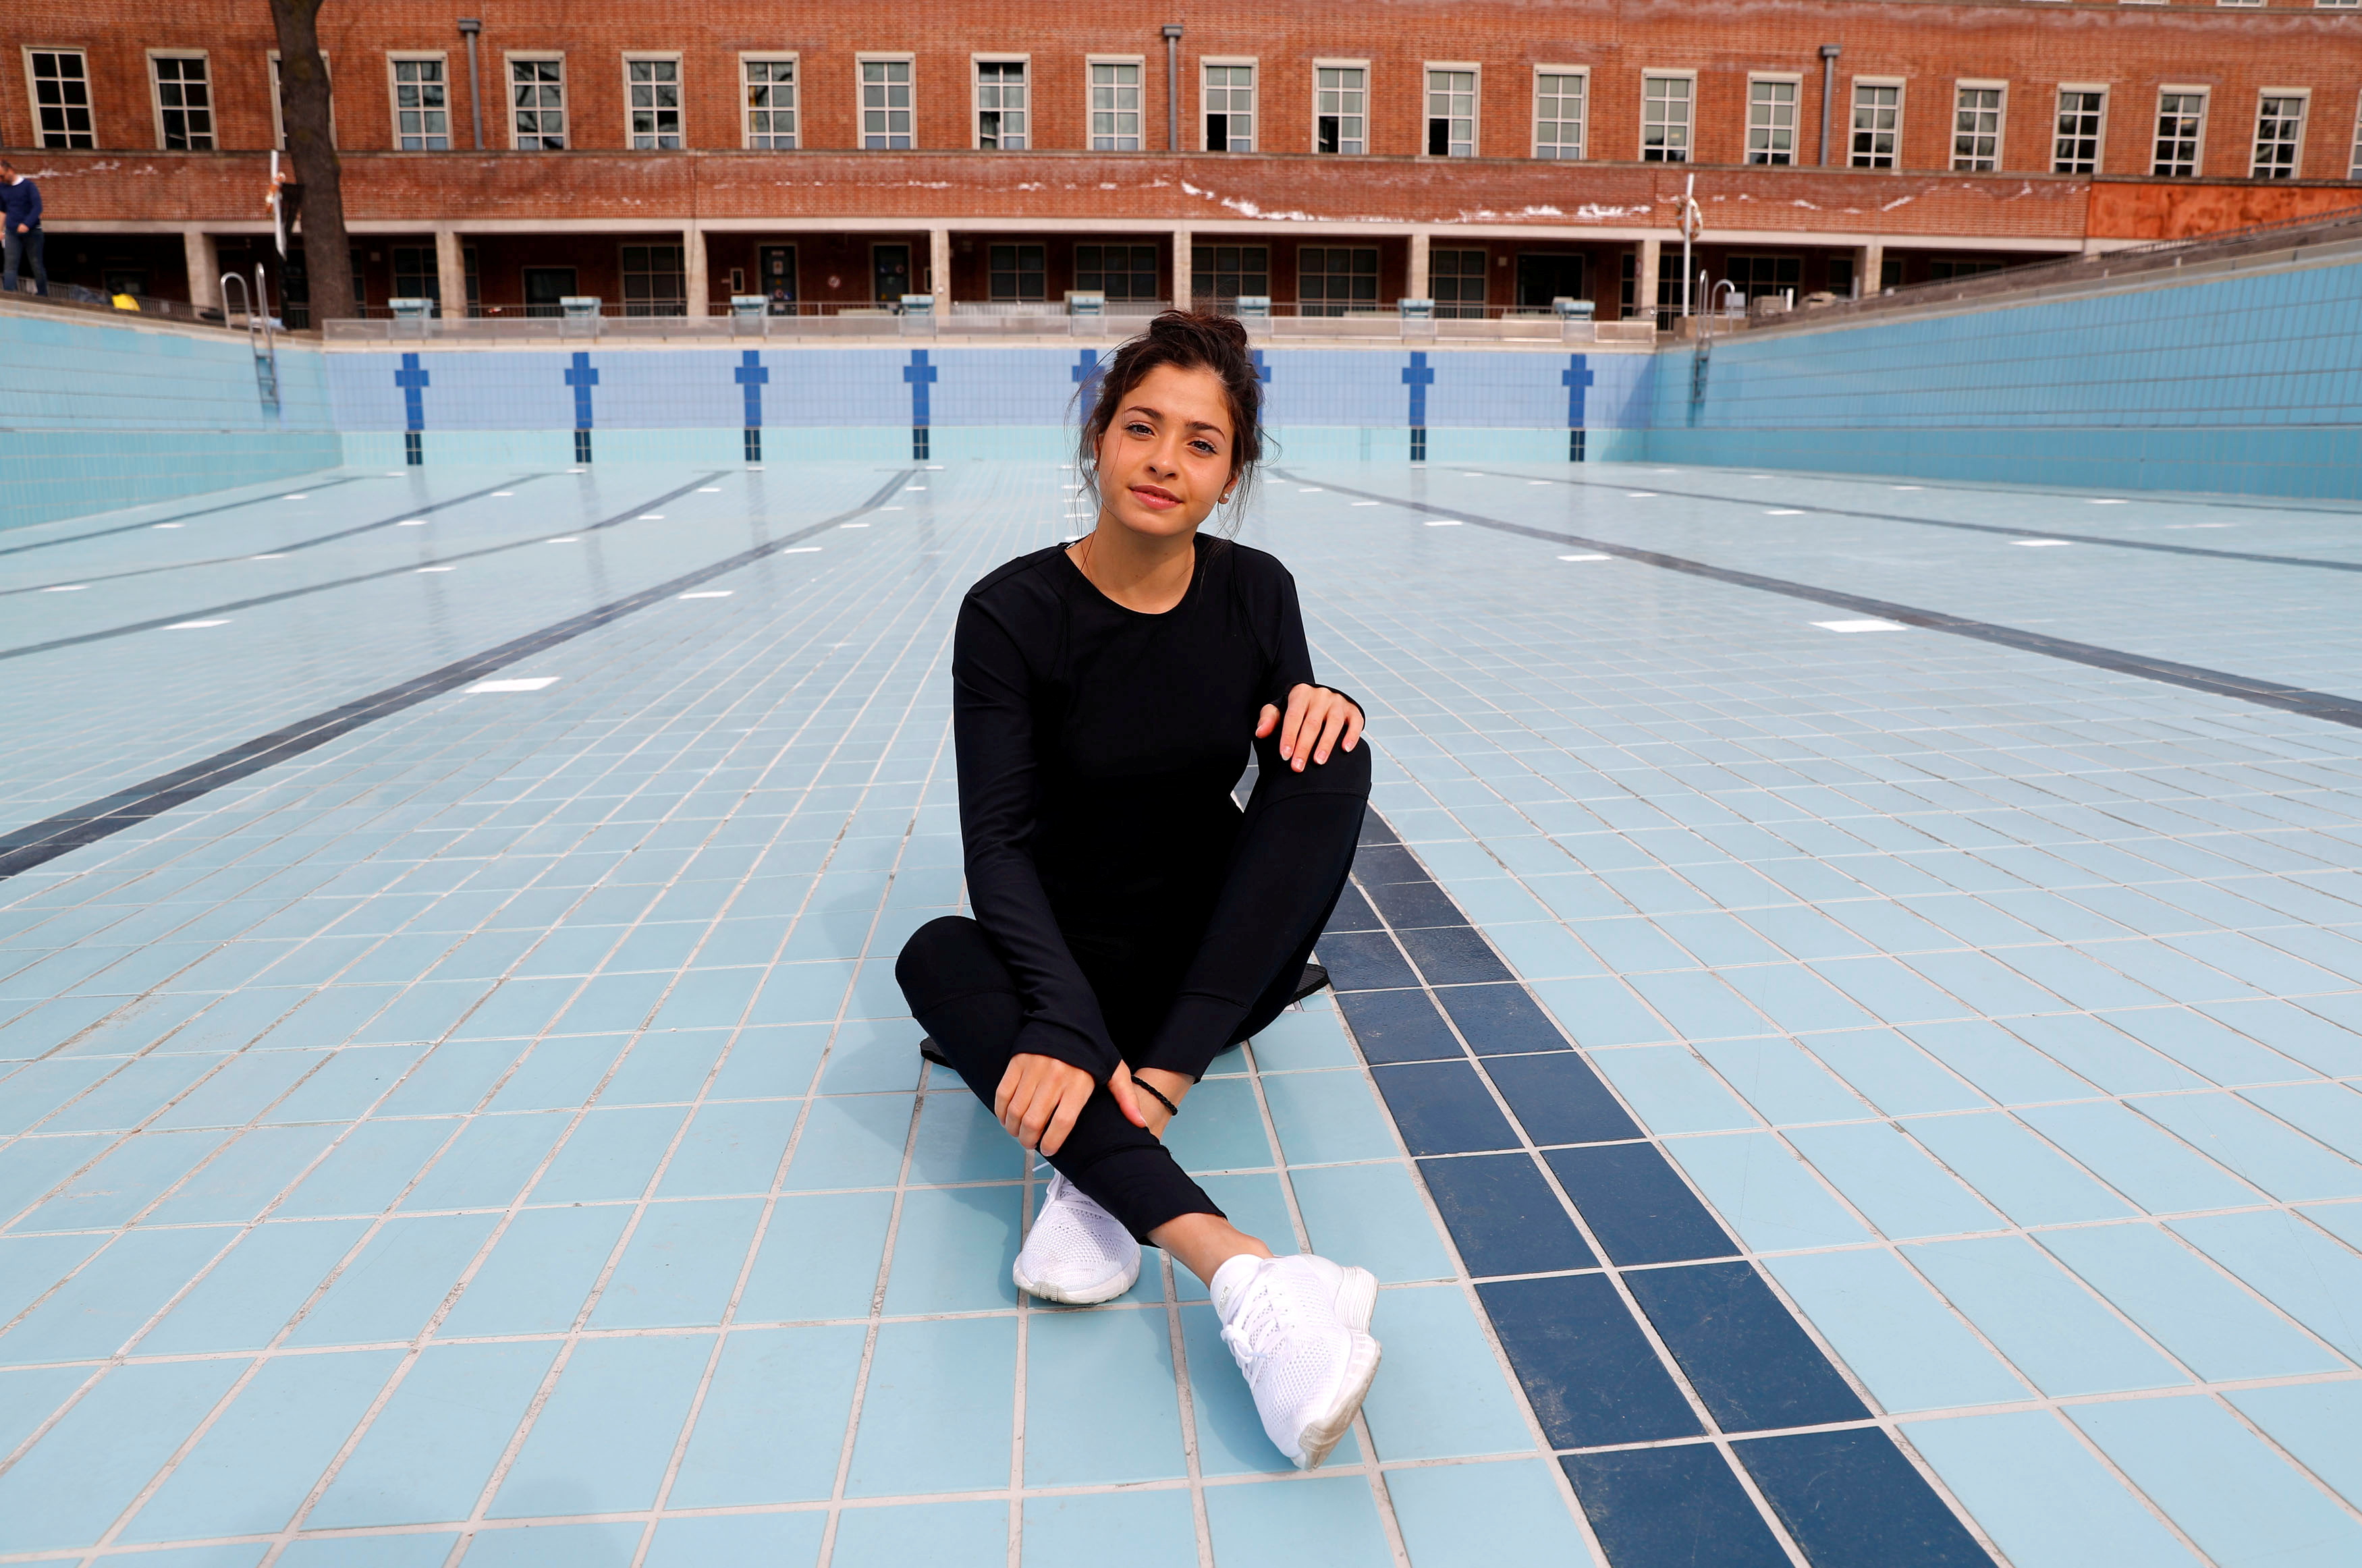 Syrian refugee and Olympic swimmer Yusra Mardini poses for the photographer after a training session in a pool at the Olympic park in Berlin